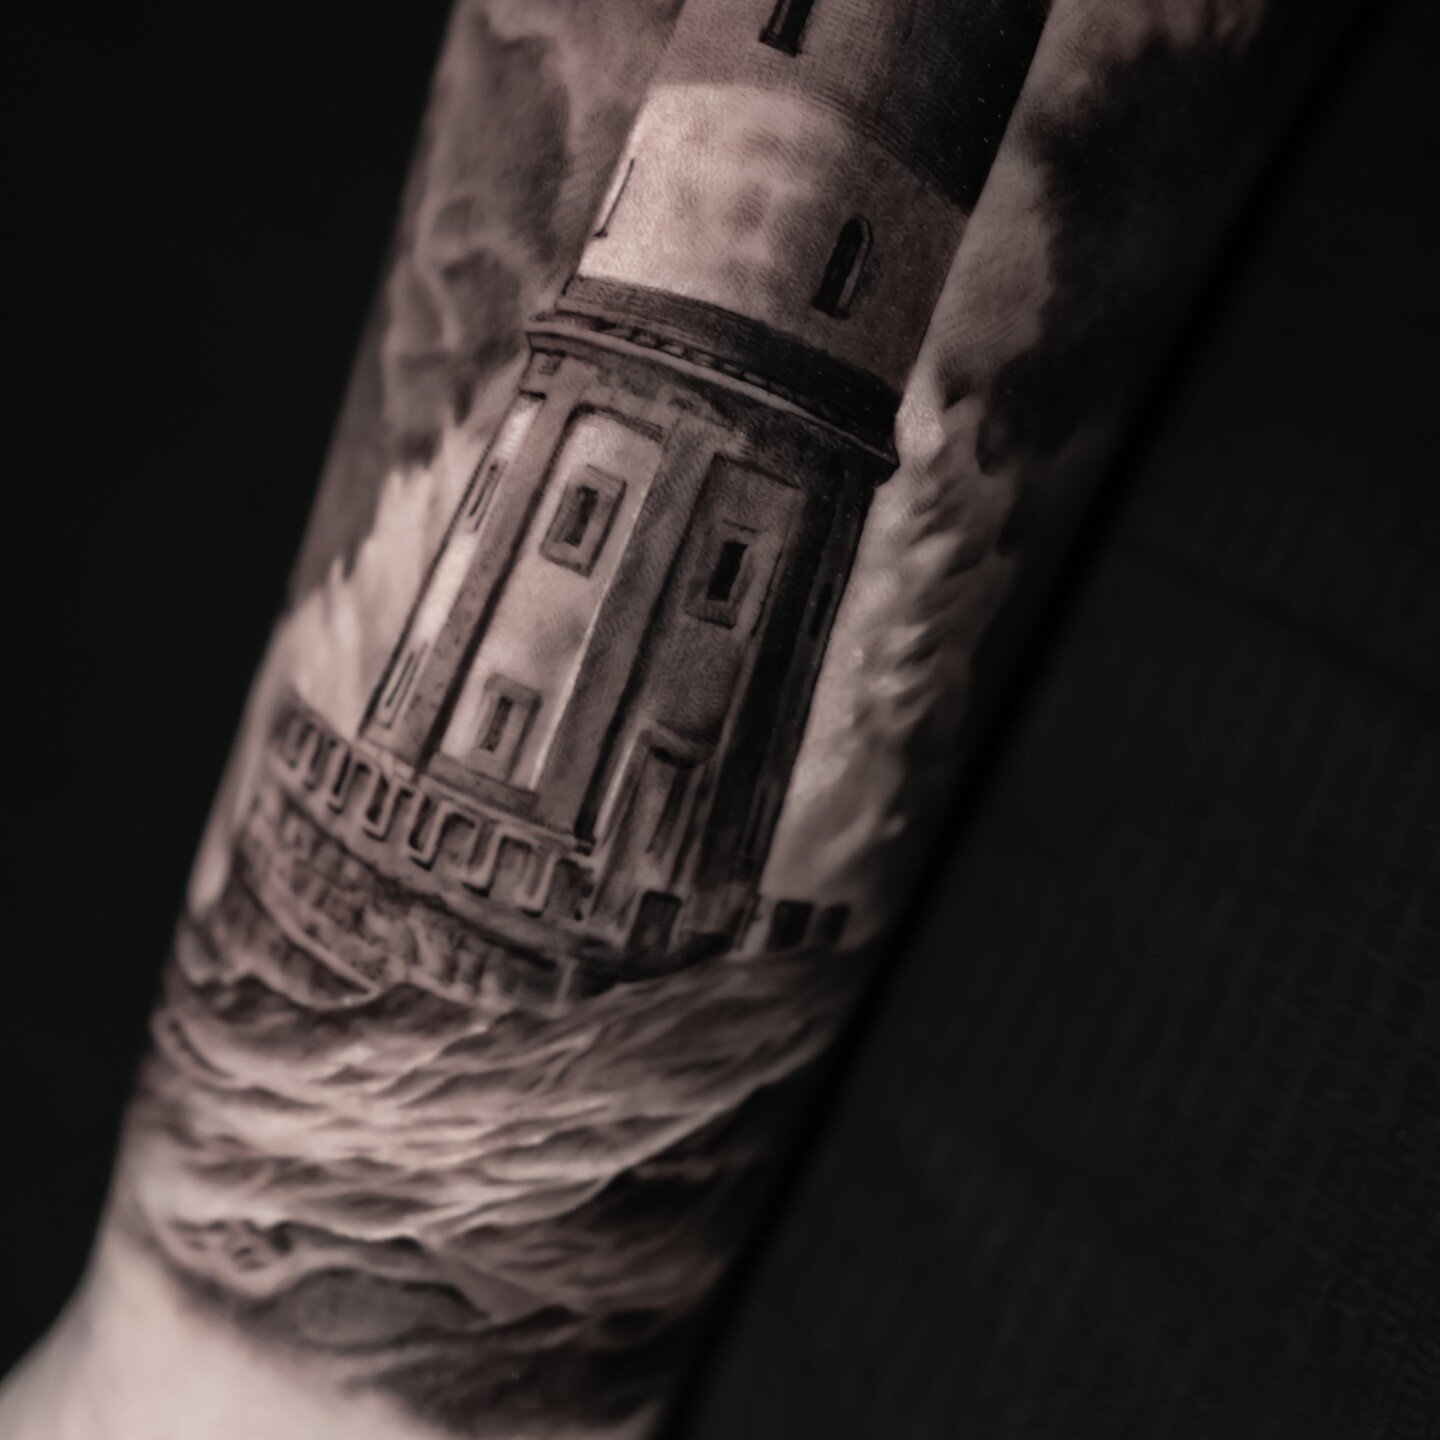 &quot;Guiding through the storm: A lighthouse of strength and resilience amidst crashing tides.&quot; for bookings visit link in bio #tattoo⁠
#tattoos⁠
#tattooed⁠
#tattooart⁠
#tattooartist⁠
#tattooist⁠
#inked⁠
#ink⁠
#inkedup⁠
#bodyart⁠
#tattooideas⁠
